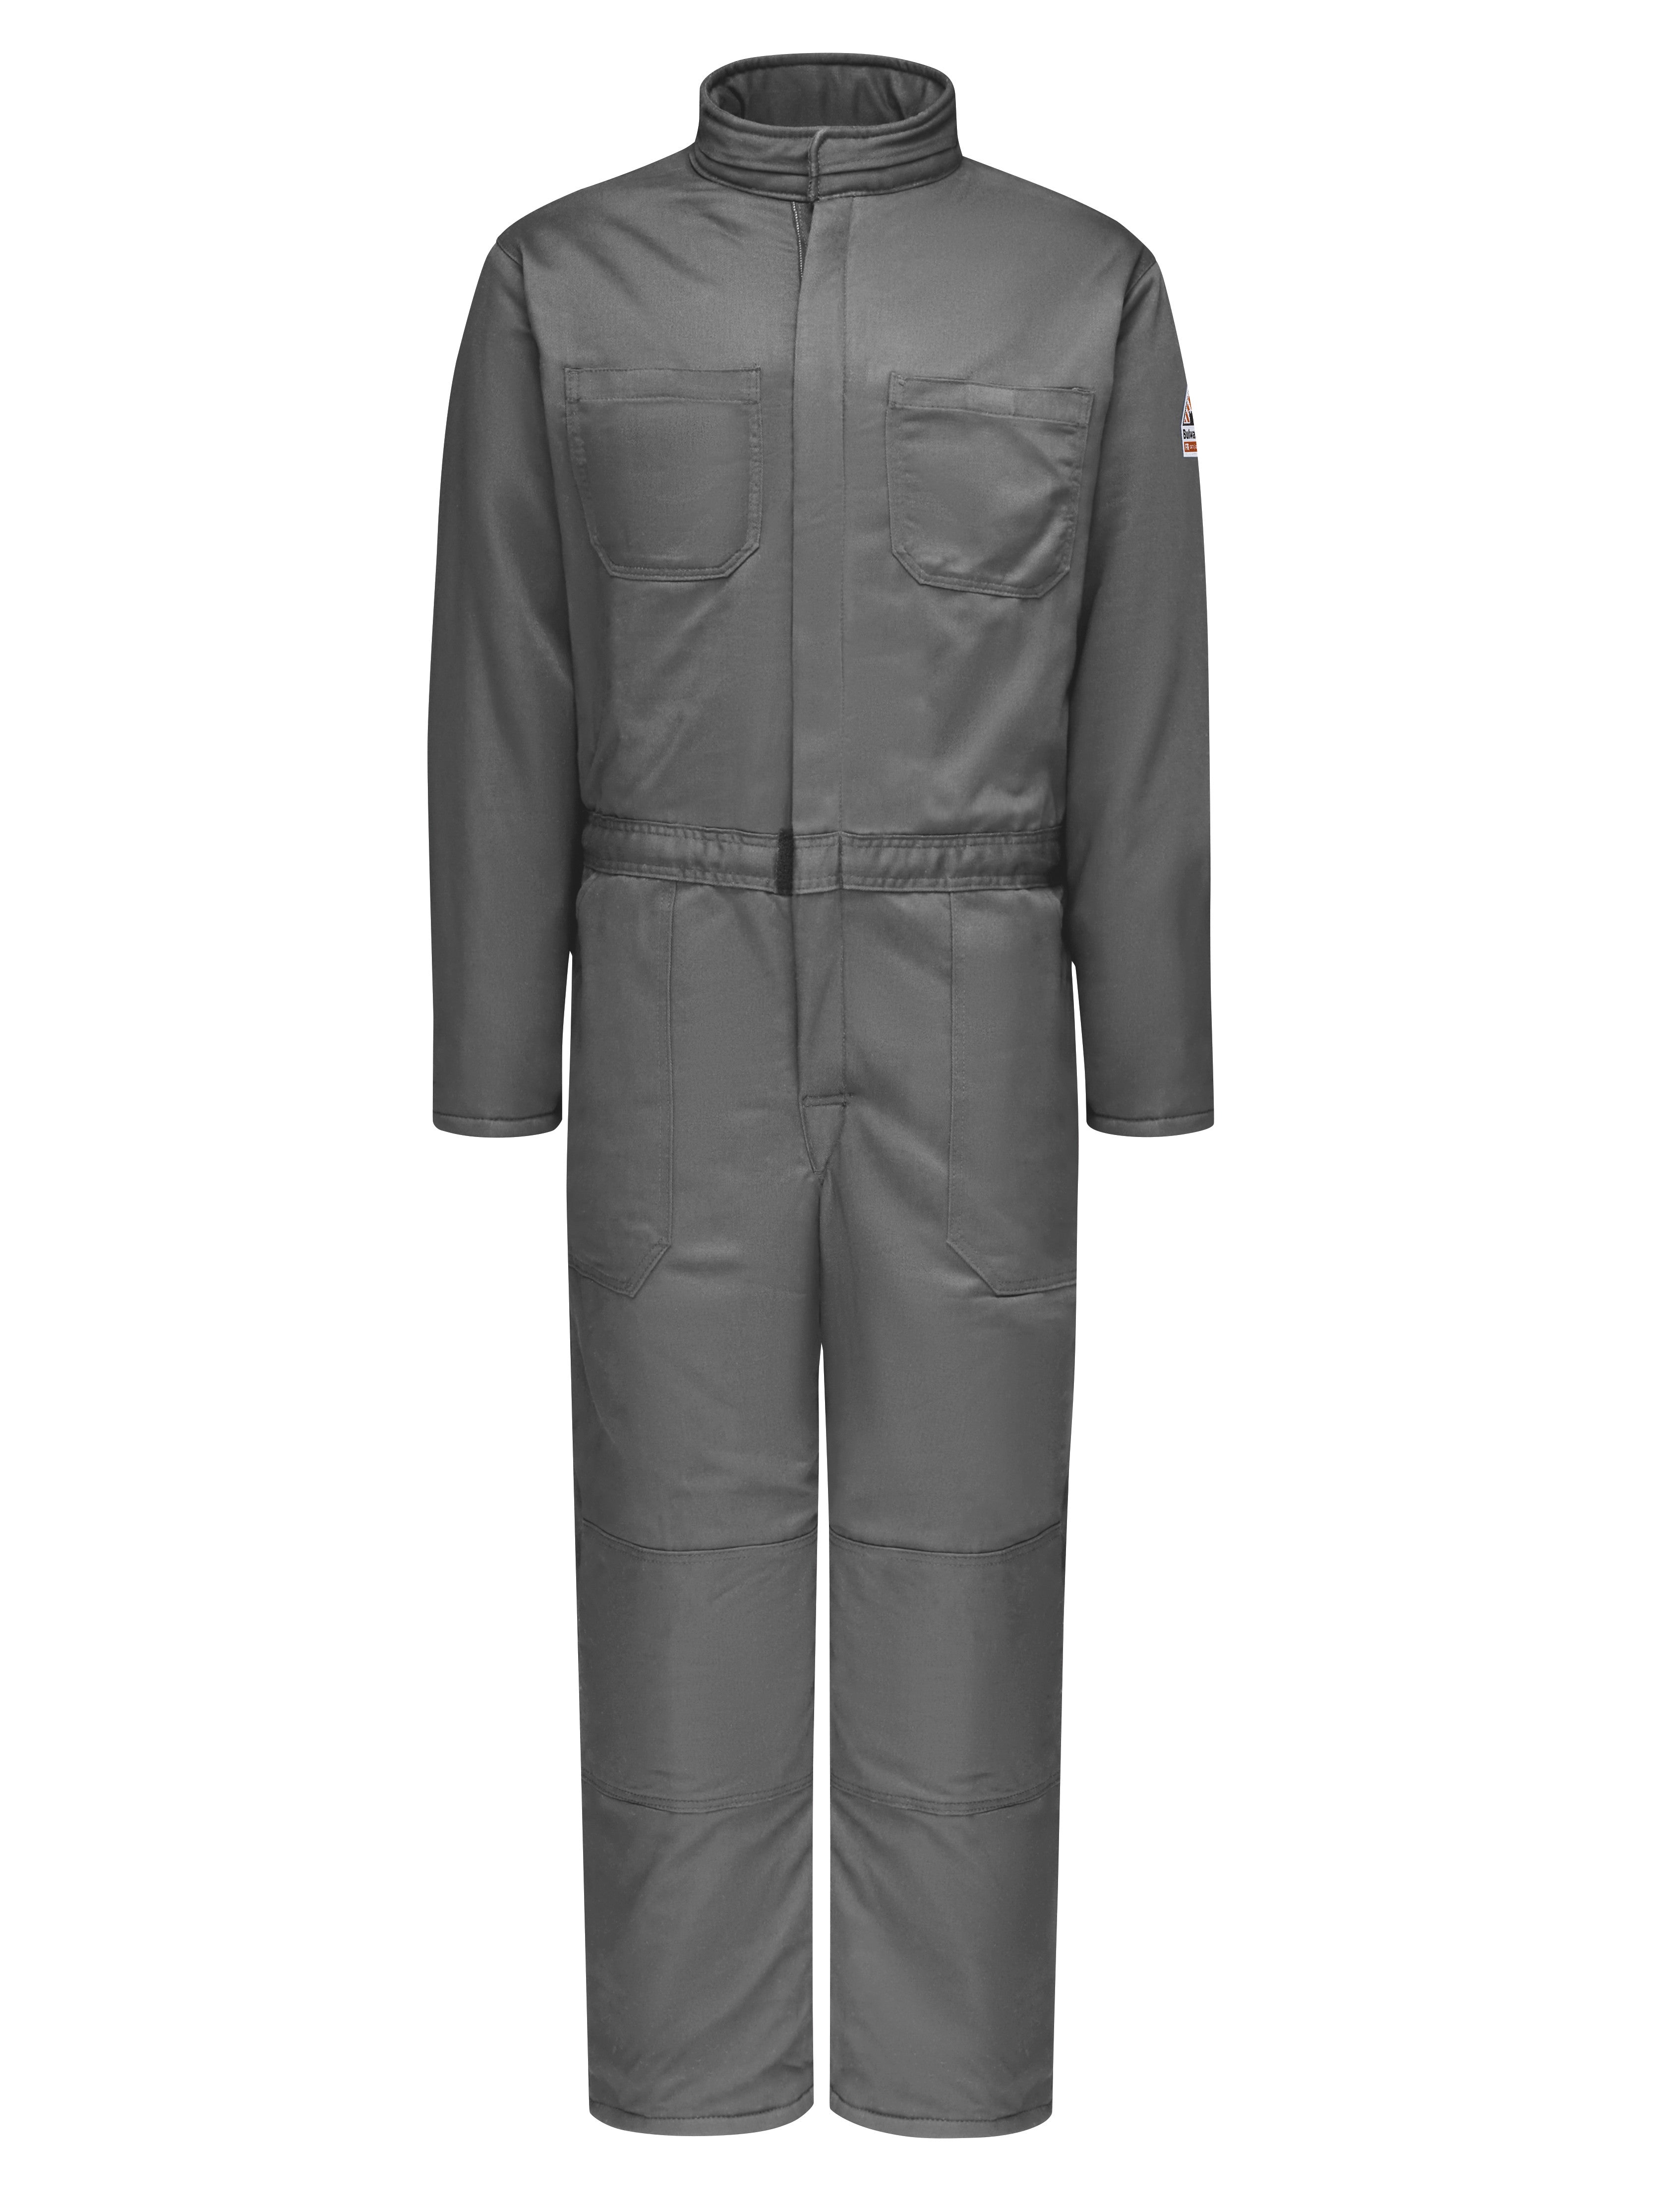 Men's Lightweight Excel FR® ComforTouch® Premium Insulated Coverall with Leg Tabs CLC8 - Grey-eSafety Supplies, Inc